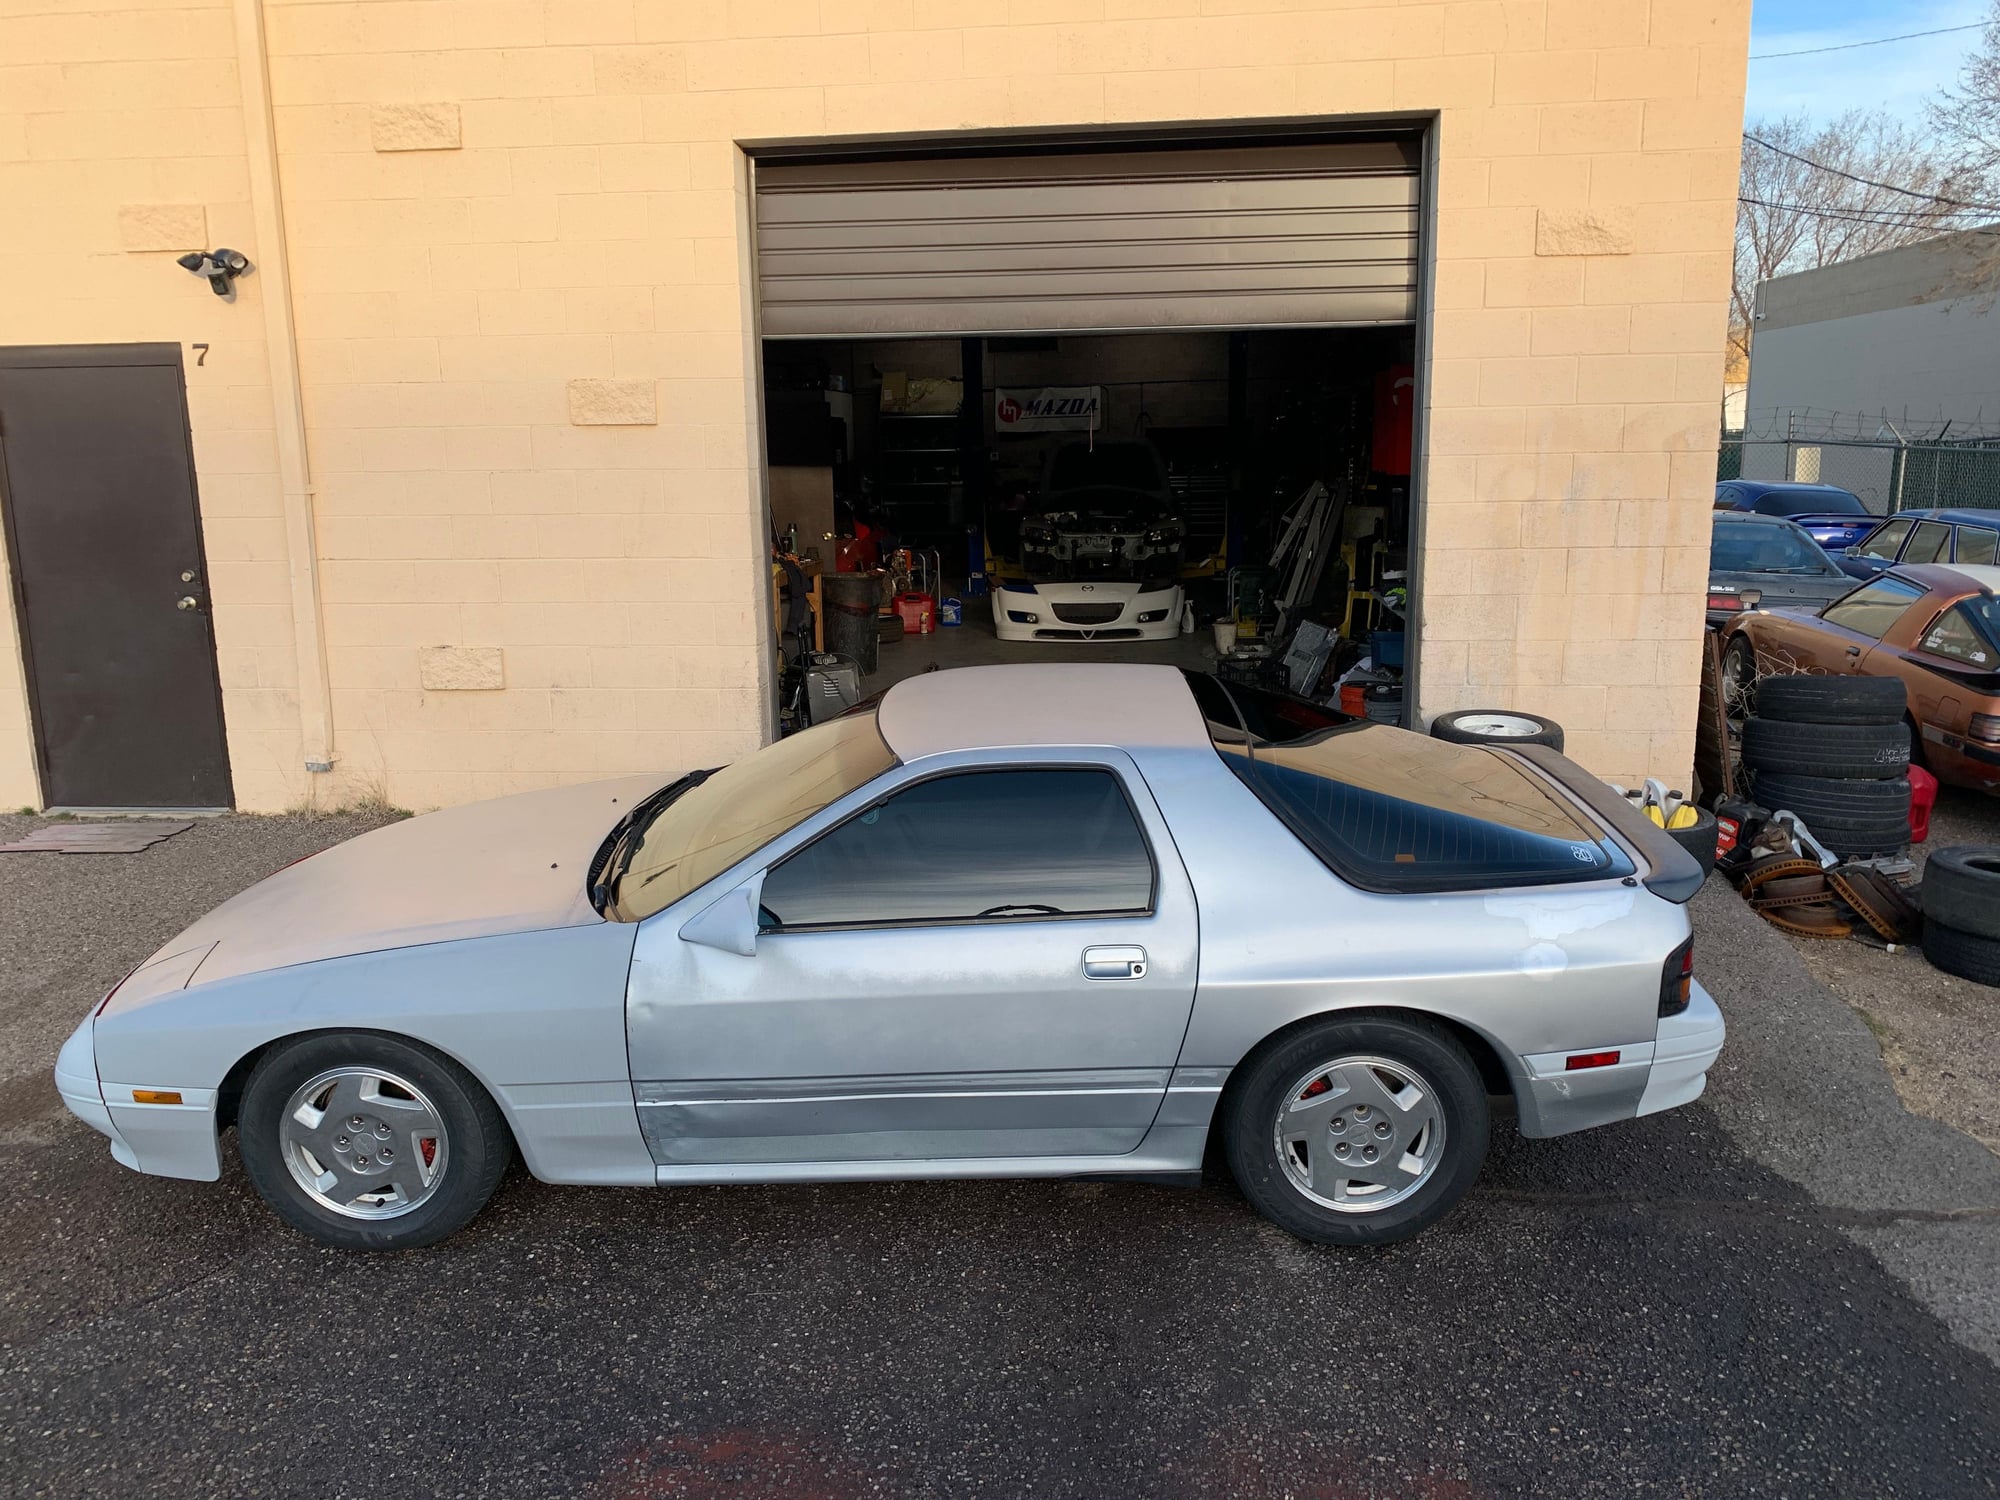 1986 Mazda RX-7 - Freshly rebuilt 1986 FC Rx-7 - Used - VIN JM1FC3318G0130254 - 121,000 Miles - Other - 2WD - Manual - Coupe - Silver - Albuquerque, NM 87123, United States